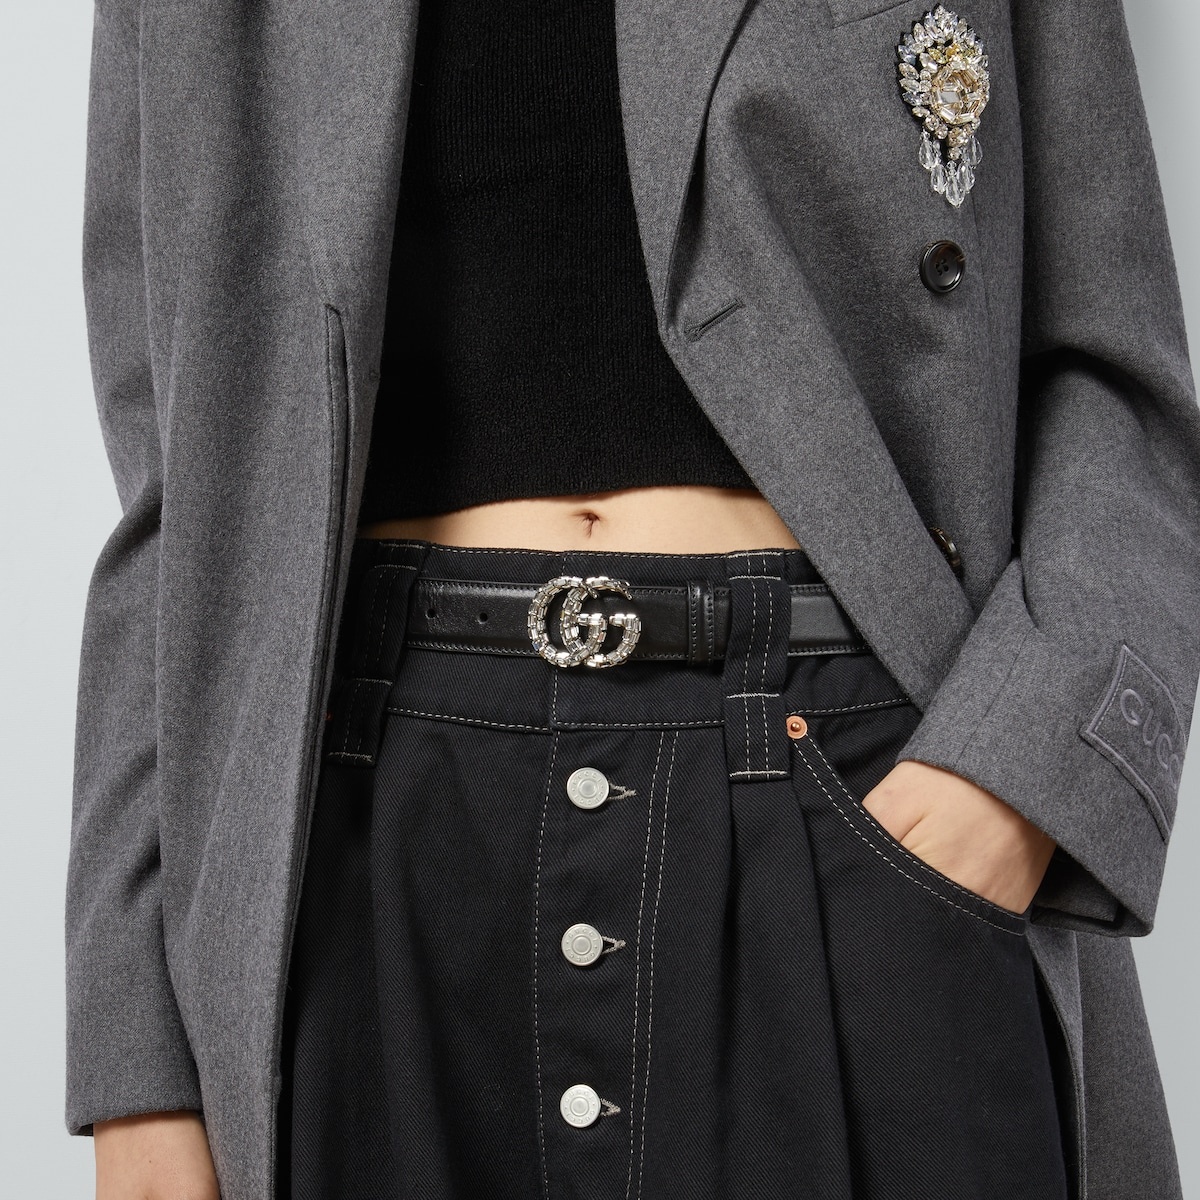 GG Marmont thin belt with crystals - 3